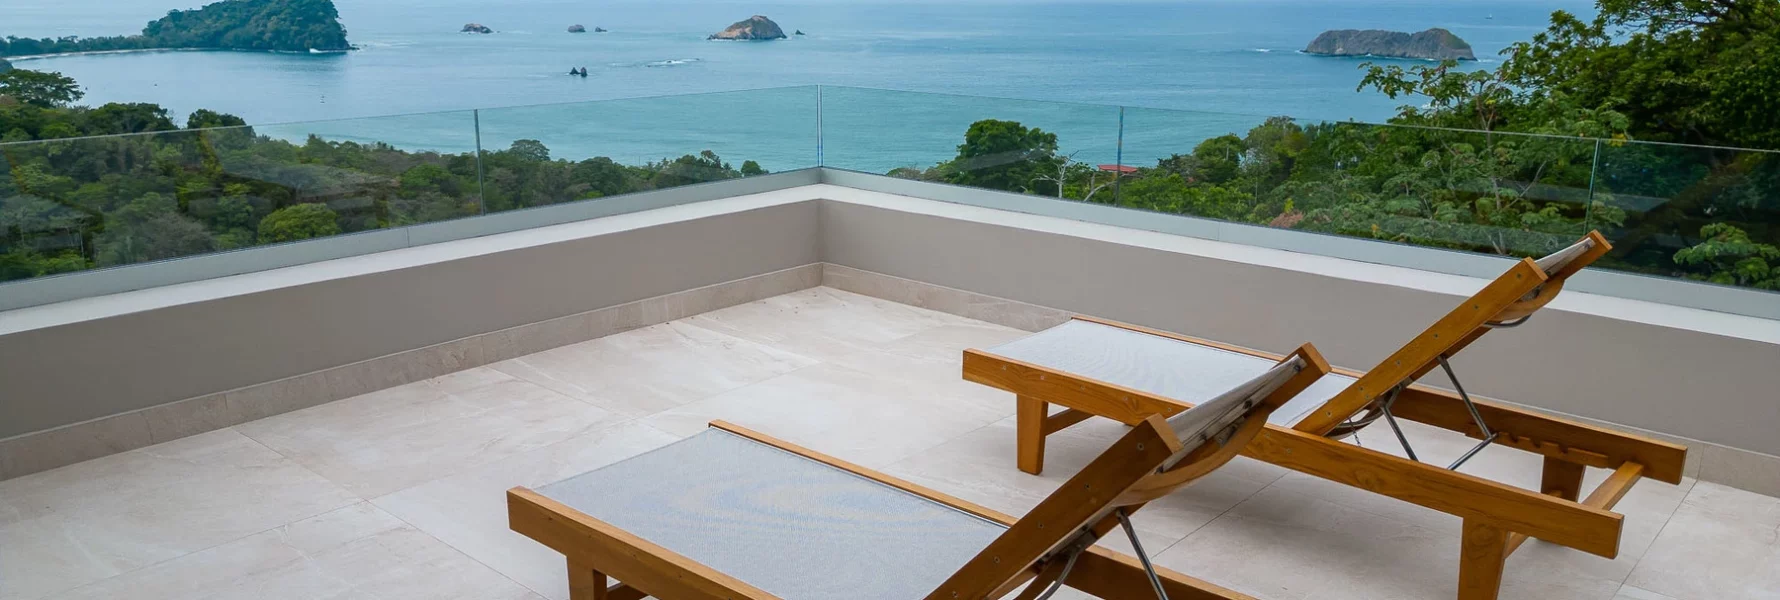 The rooftop terrace provides plenty of room to relax while enjoying the ocean view.